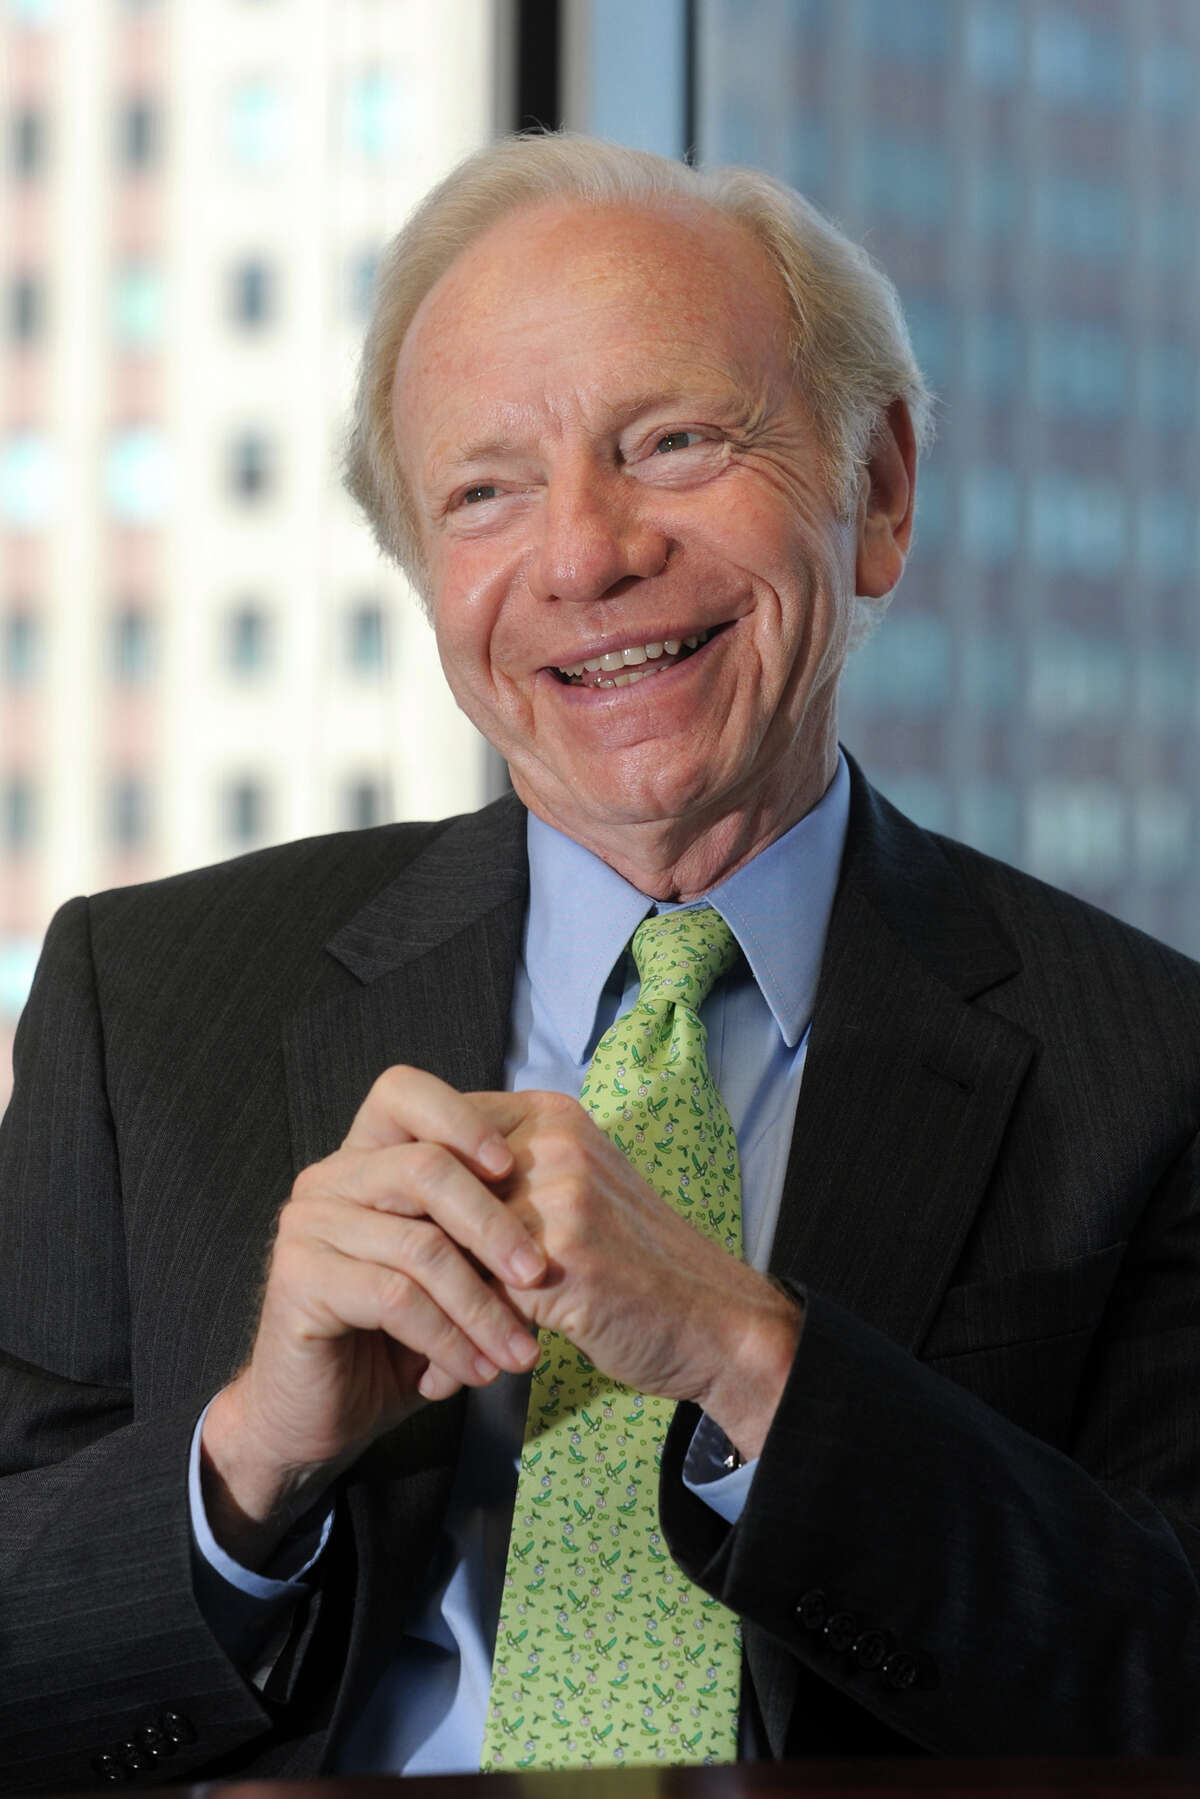 Former United State Senator Joseph Lieberman speaks during an interview in his midtown Manhattan office, in New York City, July 30th, 2013. Lieberman, a Stamford native, represented Connecticut for 24 years in the Senate, and now works as Senior Council at the law firm of Kasowitz, Benson, Torres & Friedman, in Manhattan.